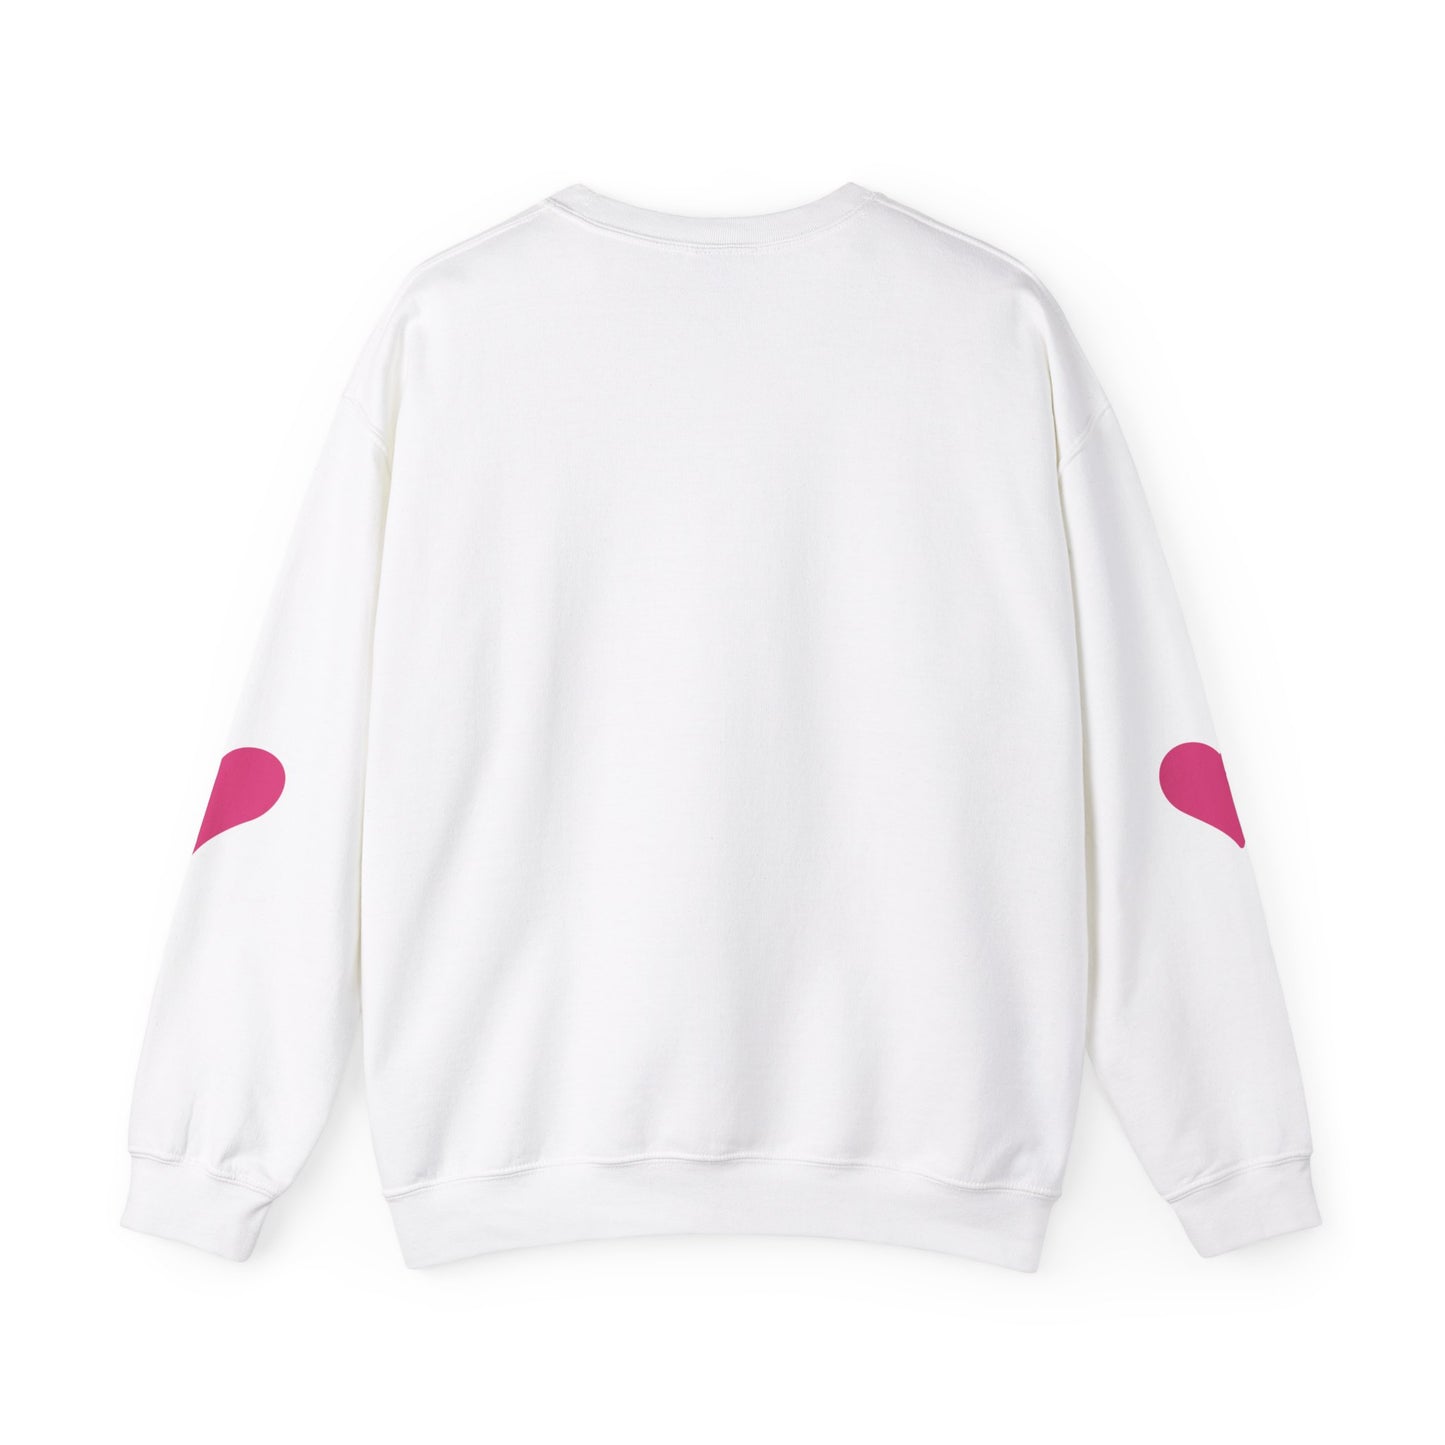 Love Heart Sweatshirt with Heart Arm Patches